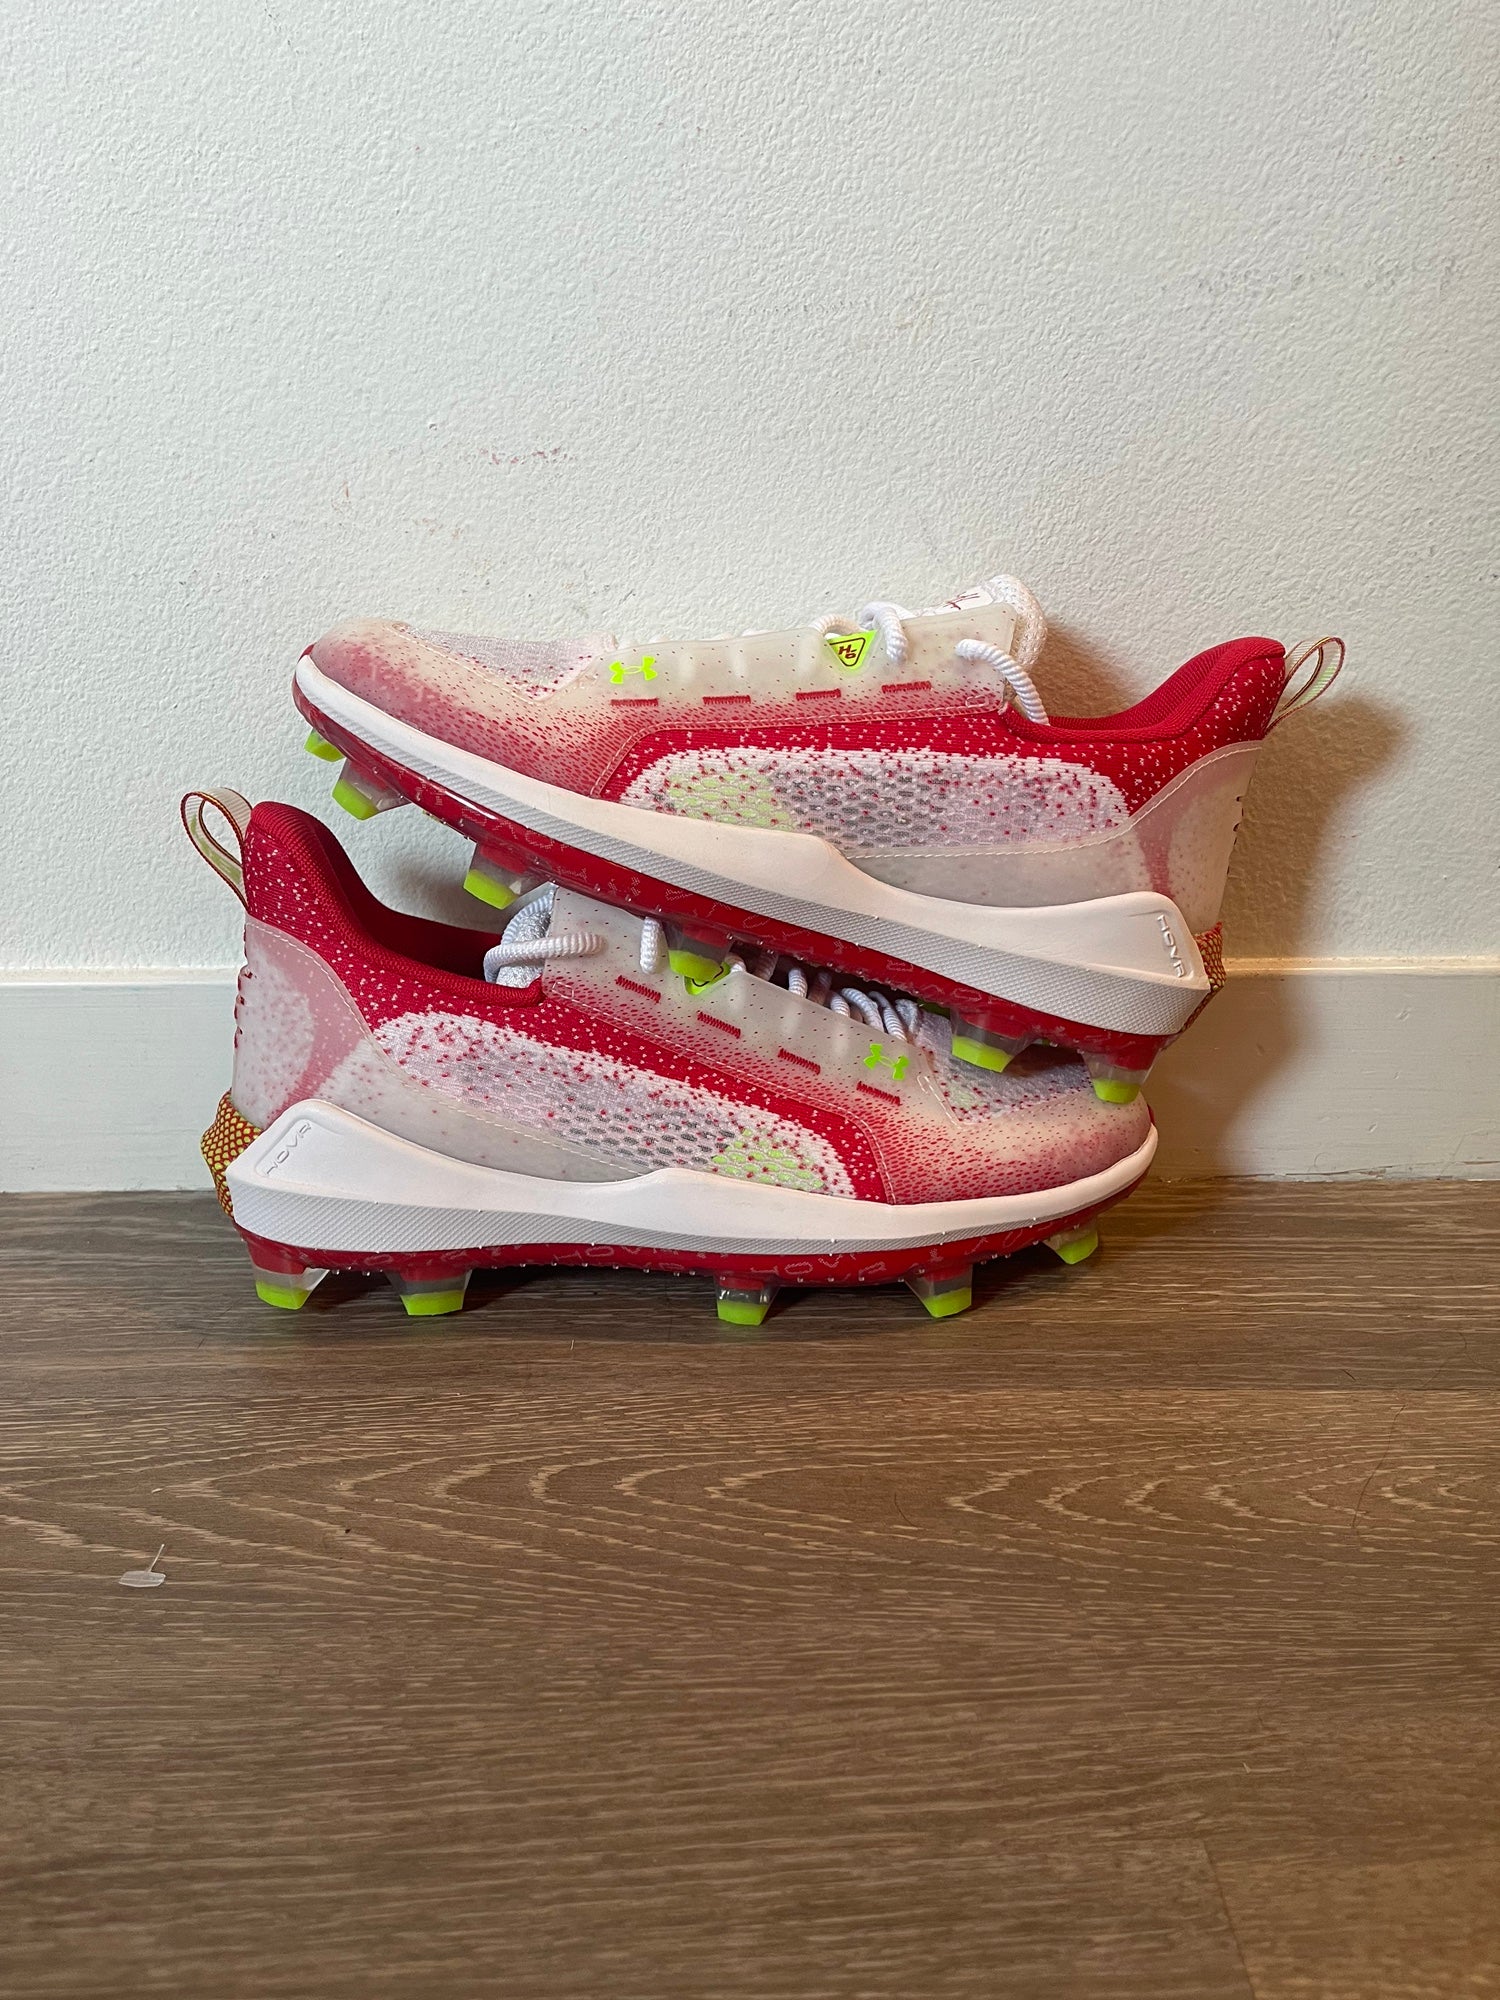 What Pros Wear: Bryce Harper's Under Armour Harper 3 “4th of July” Cleats -  What Pros Wear